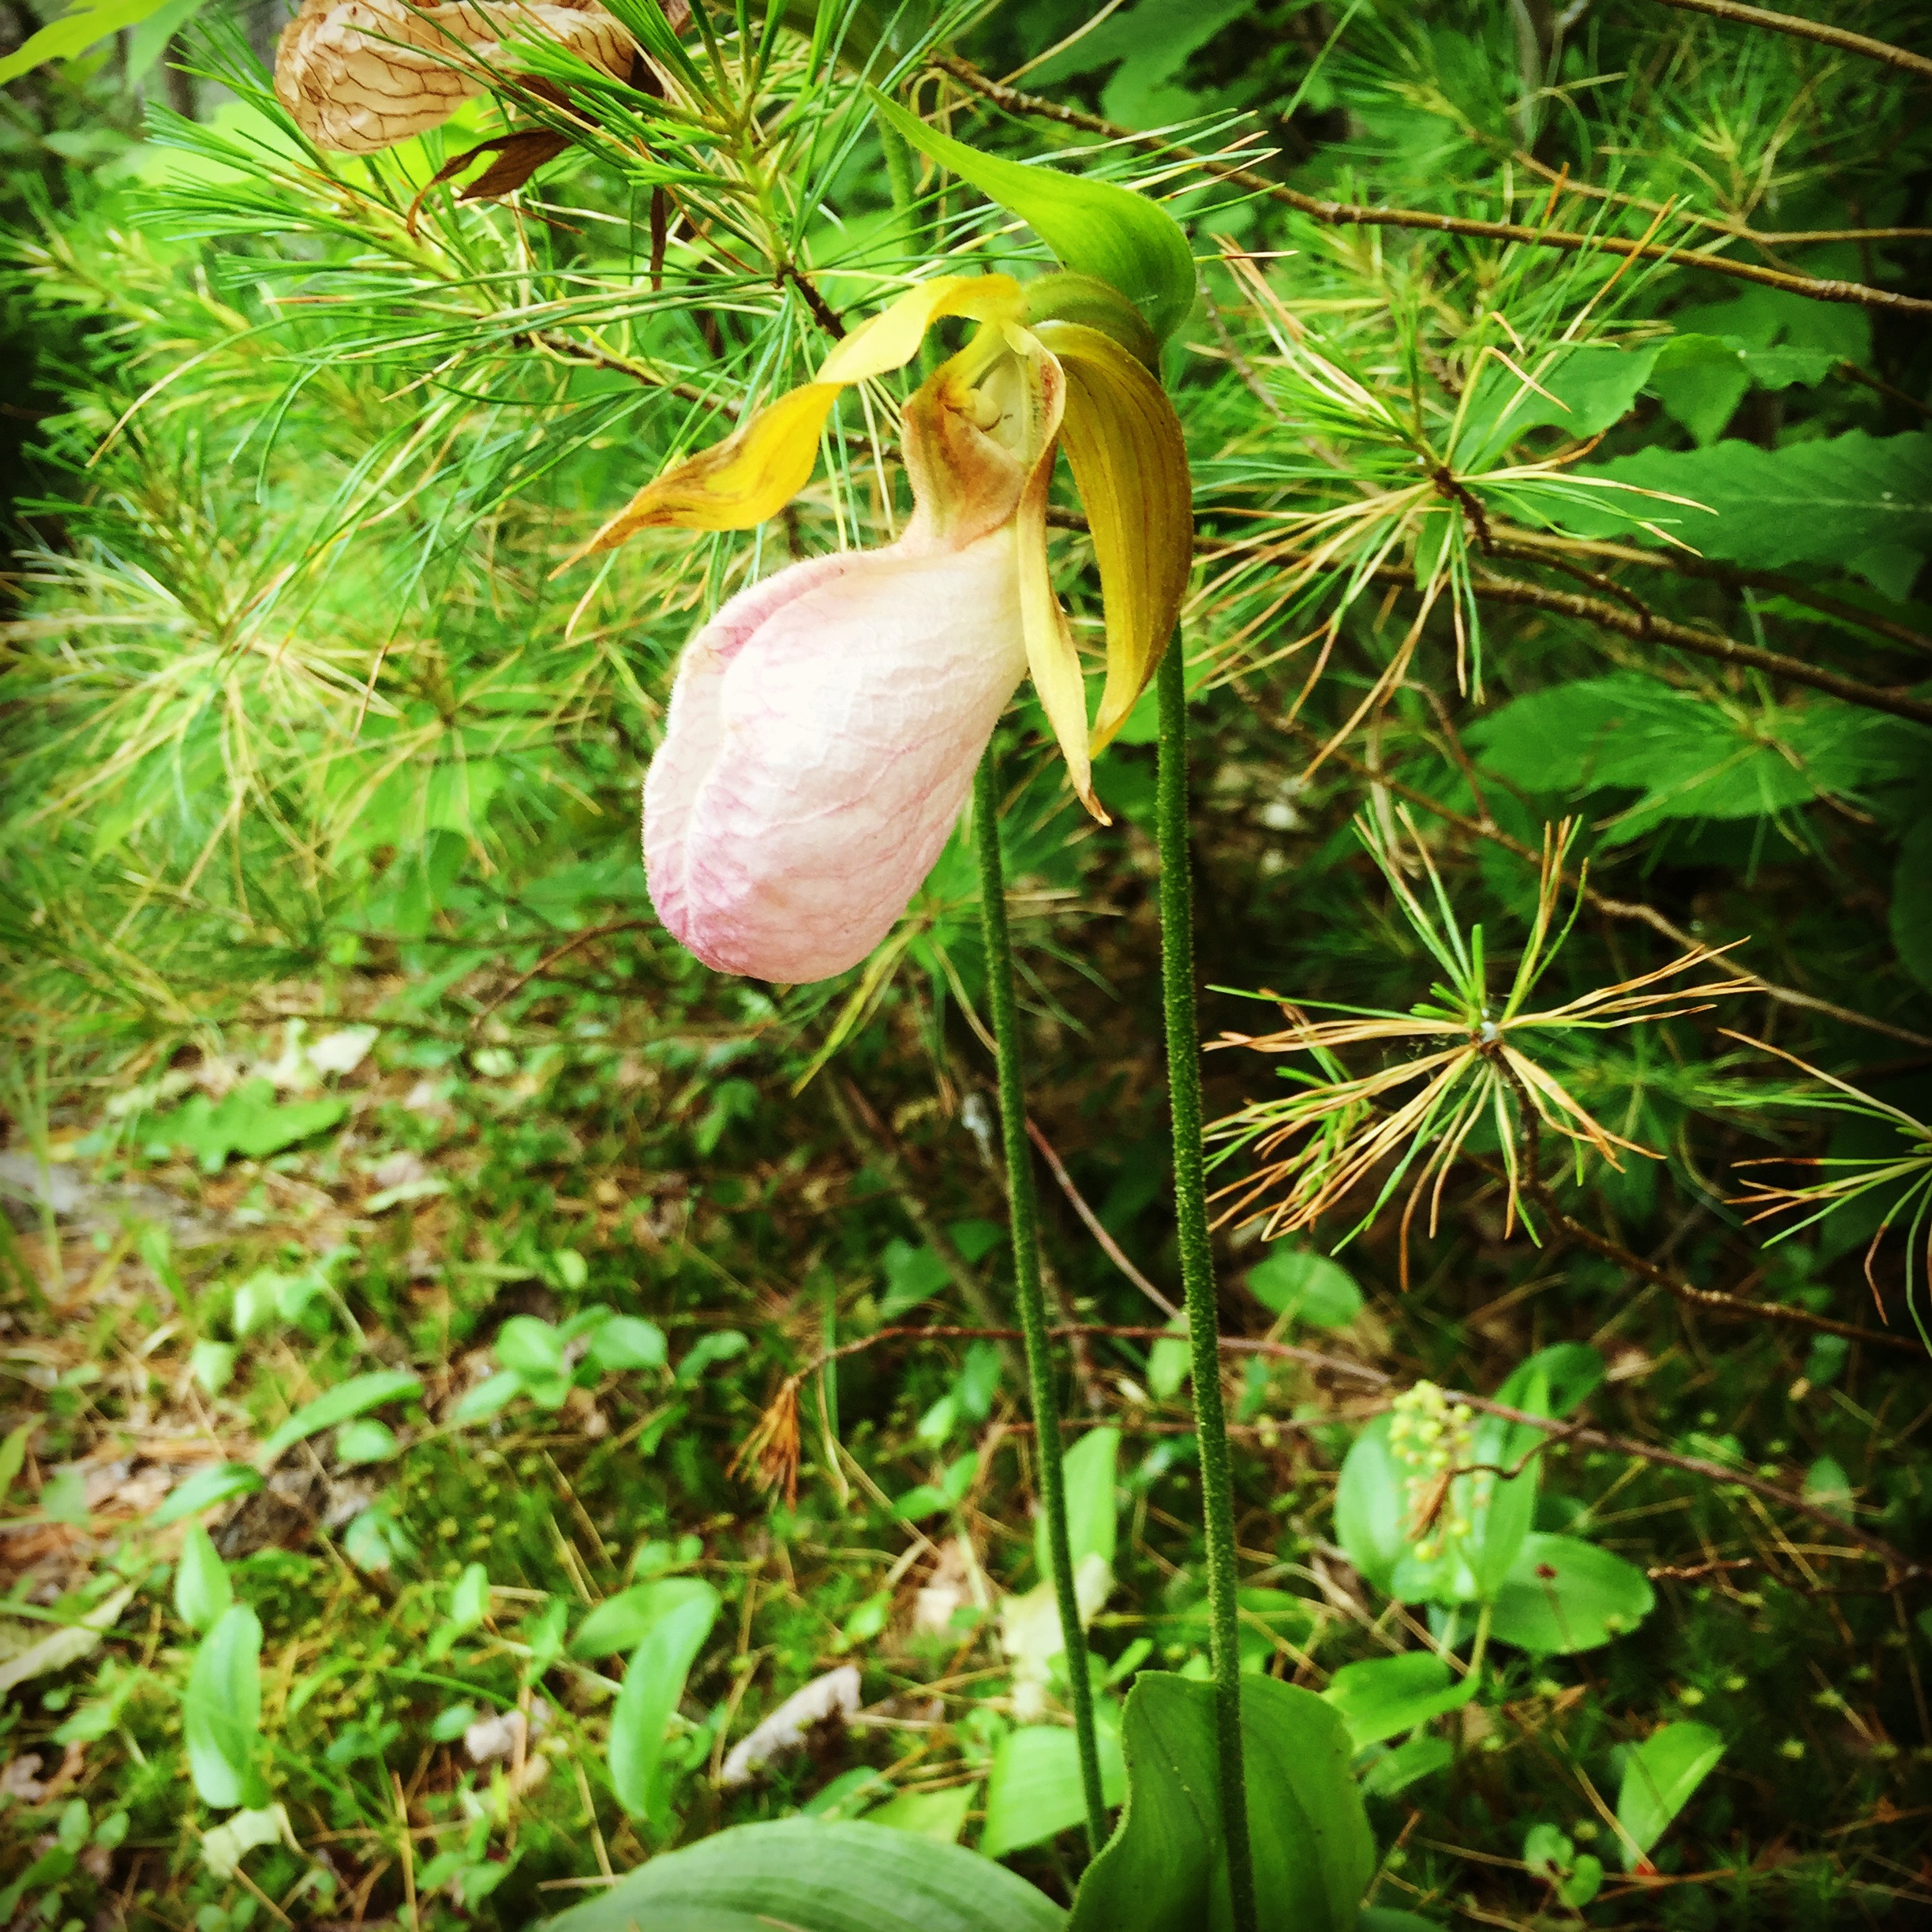  One last lady slipper orchid in bloom. I almost walked right by this one; they blend in to the forest floor so perfectly. 